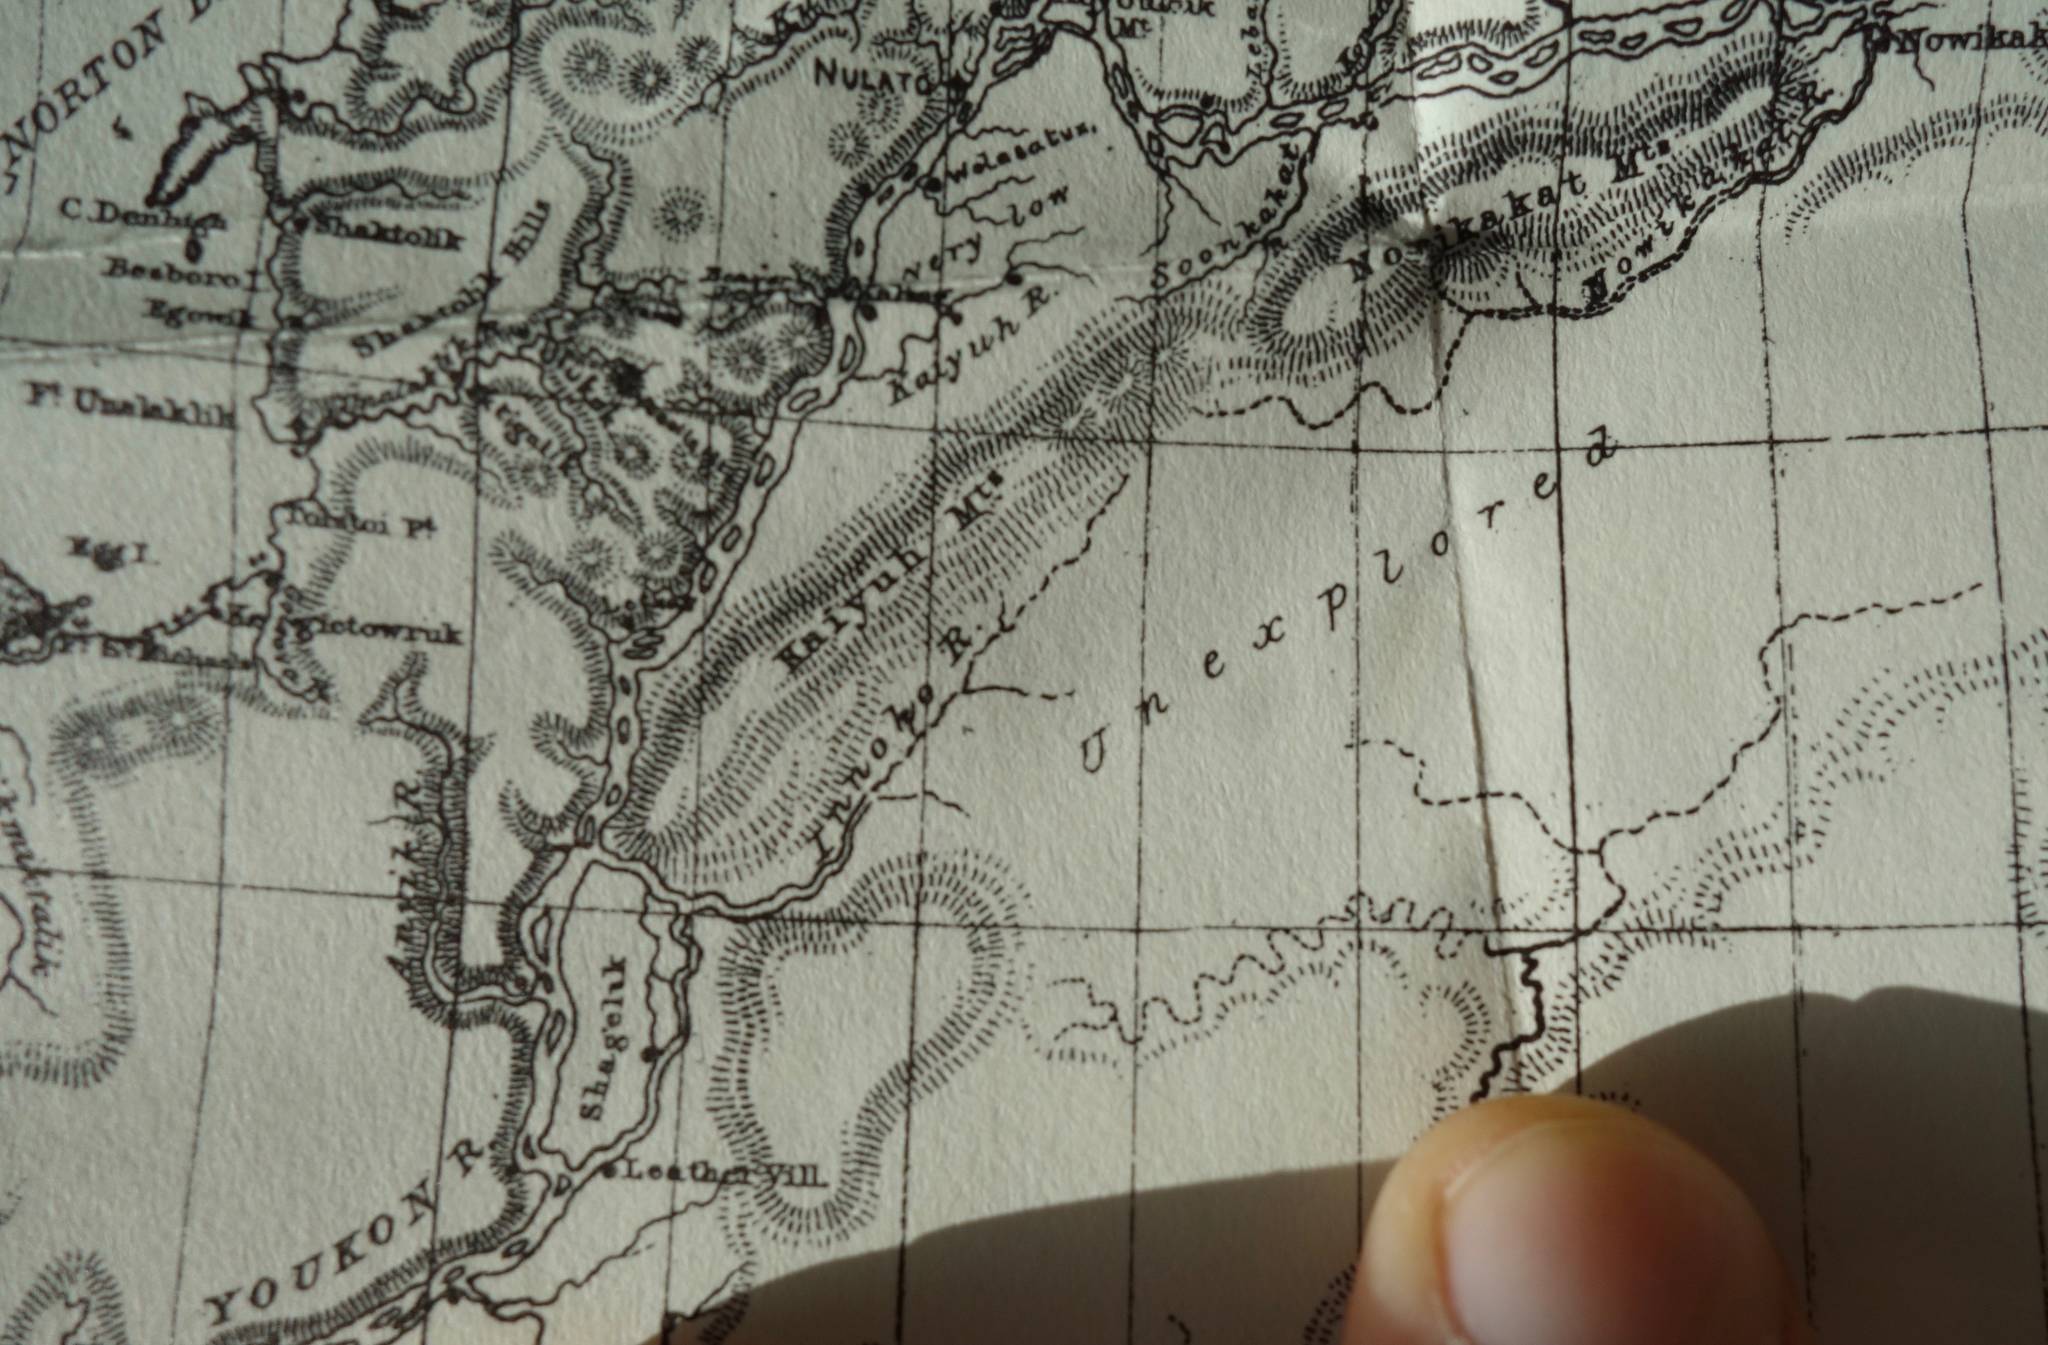 A detail of William Dall’s 1870 Alaska map, from “Alaska and its Resources.”